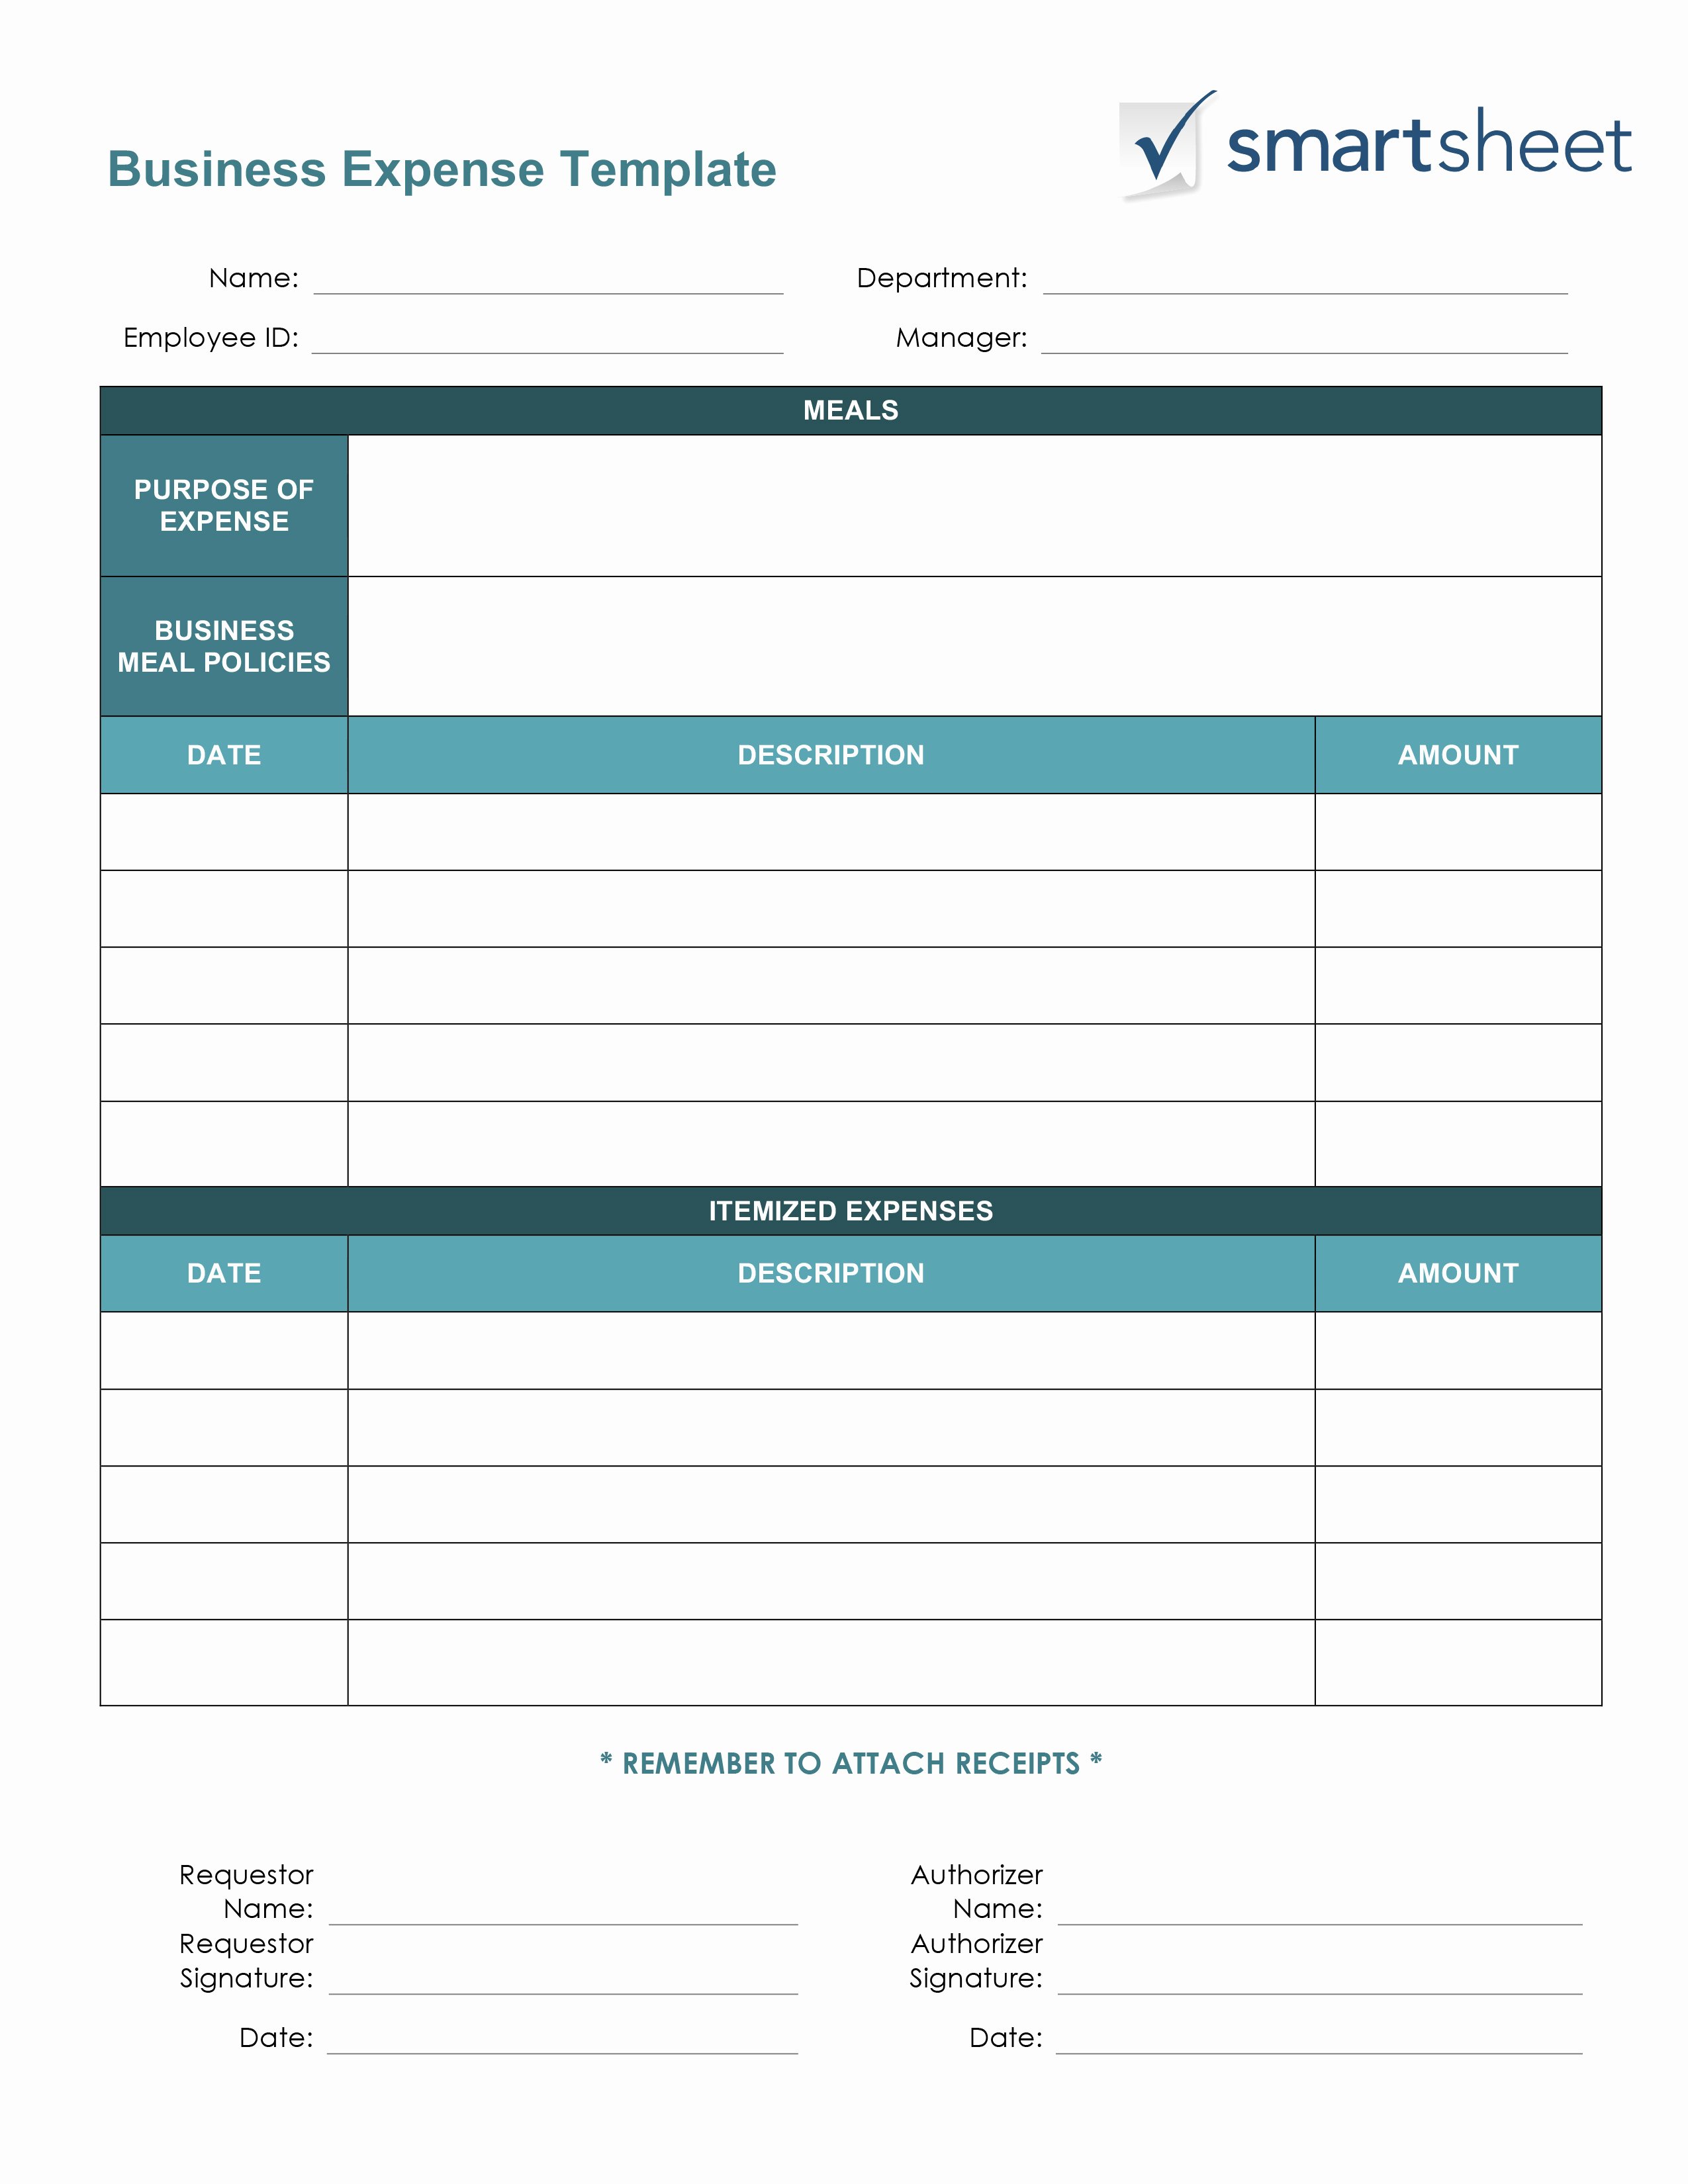 Basic Expense Report Template Awesome Basic Expense Report Template Portablegasgrillweber